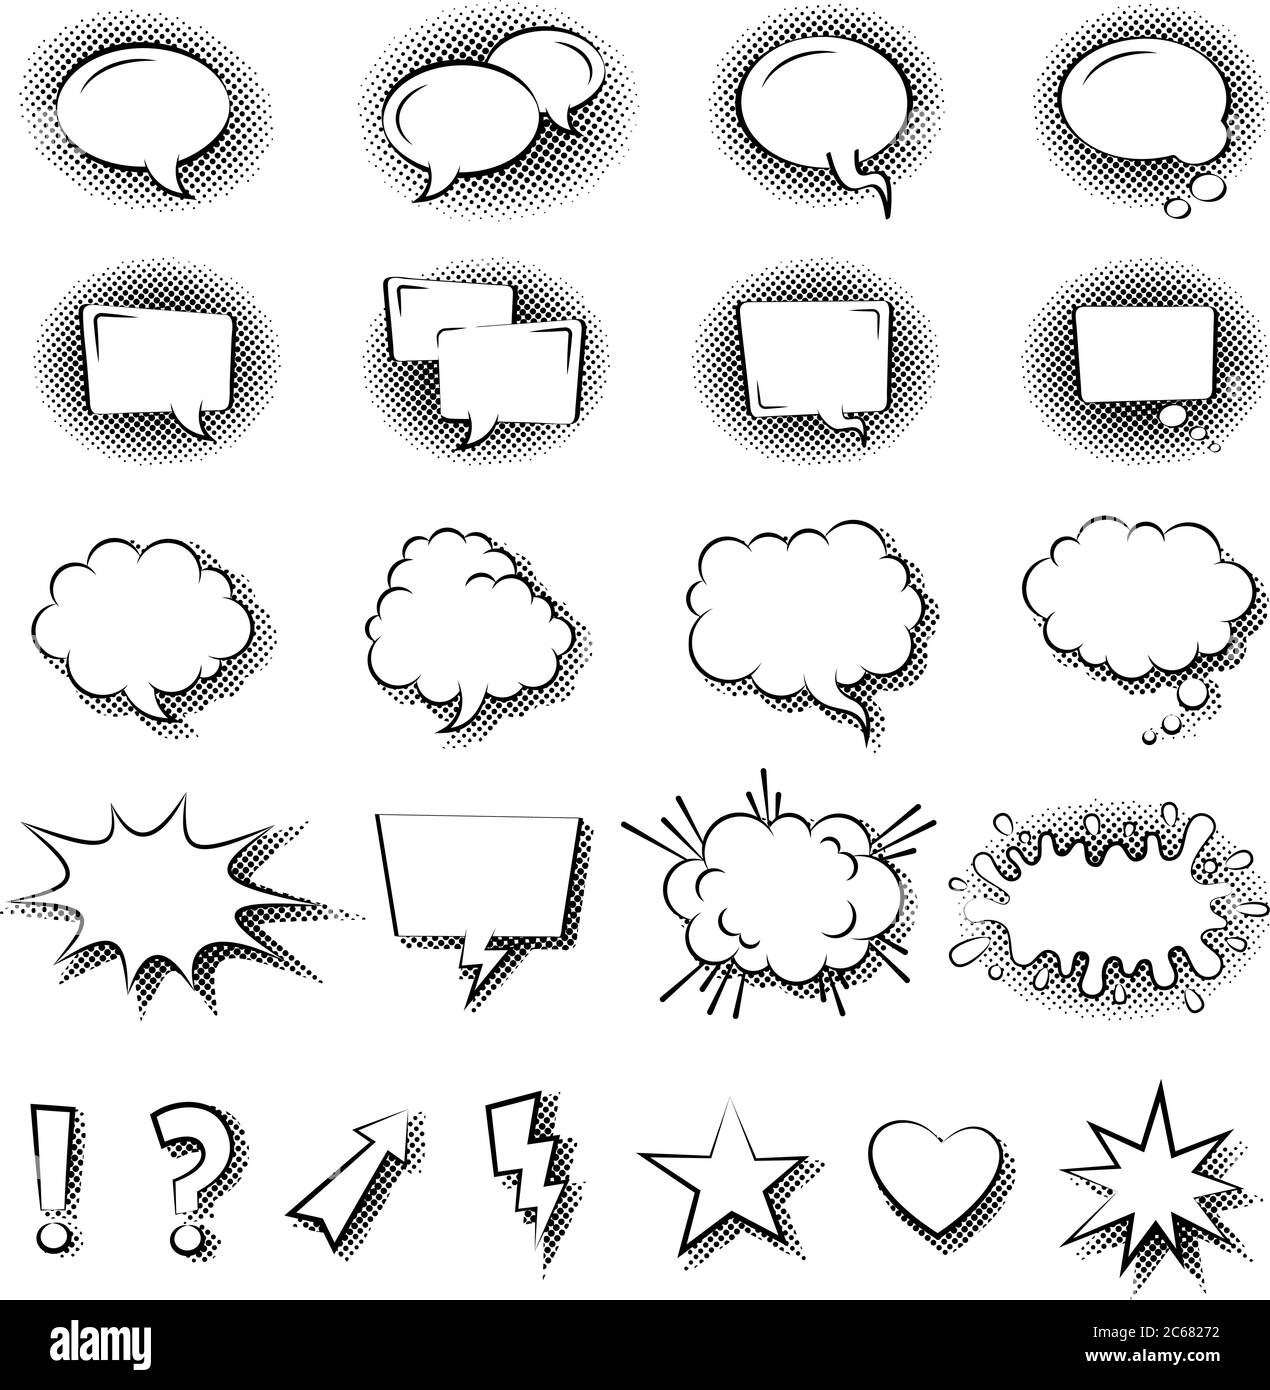 Speech bubble symbols, icon set. Hand drawn thought and speech bubbles and balloons, different types and shapes. Vector illustration. Stock Vector